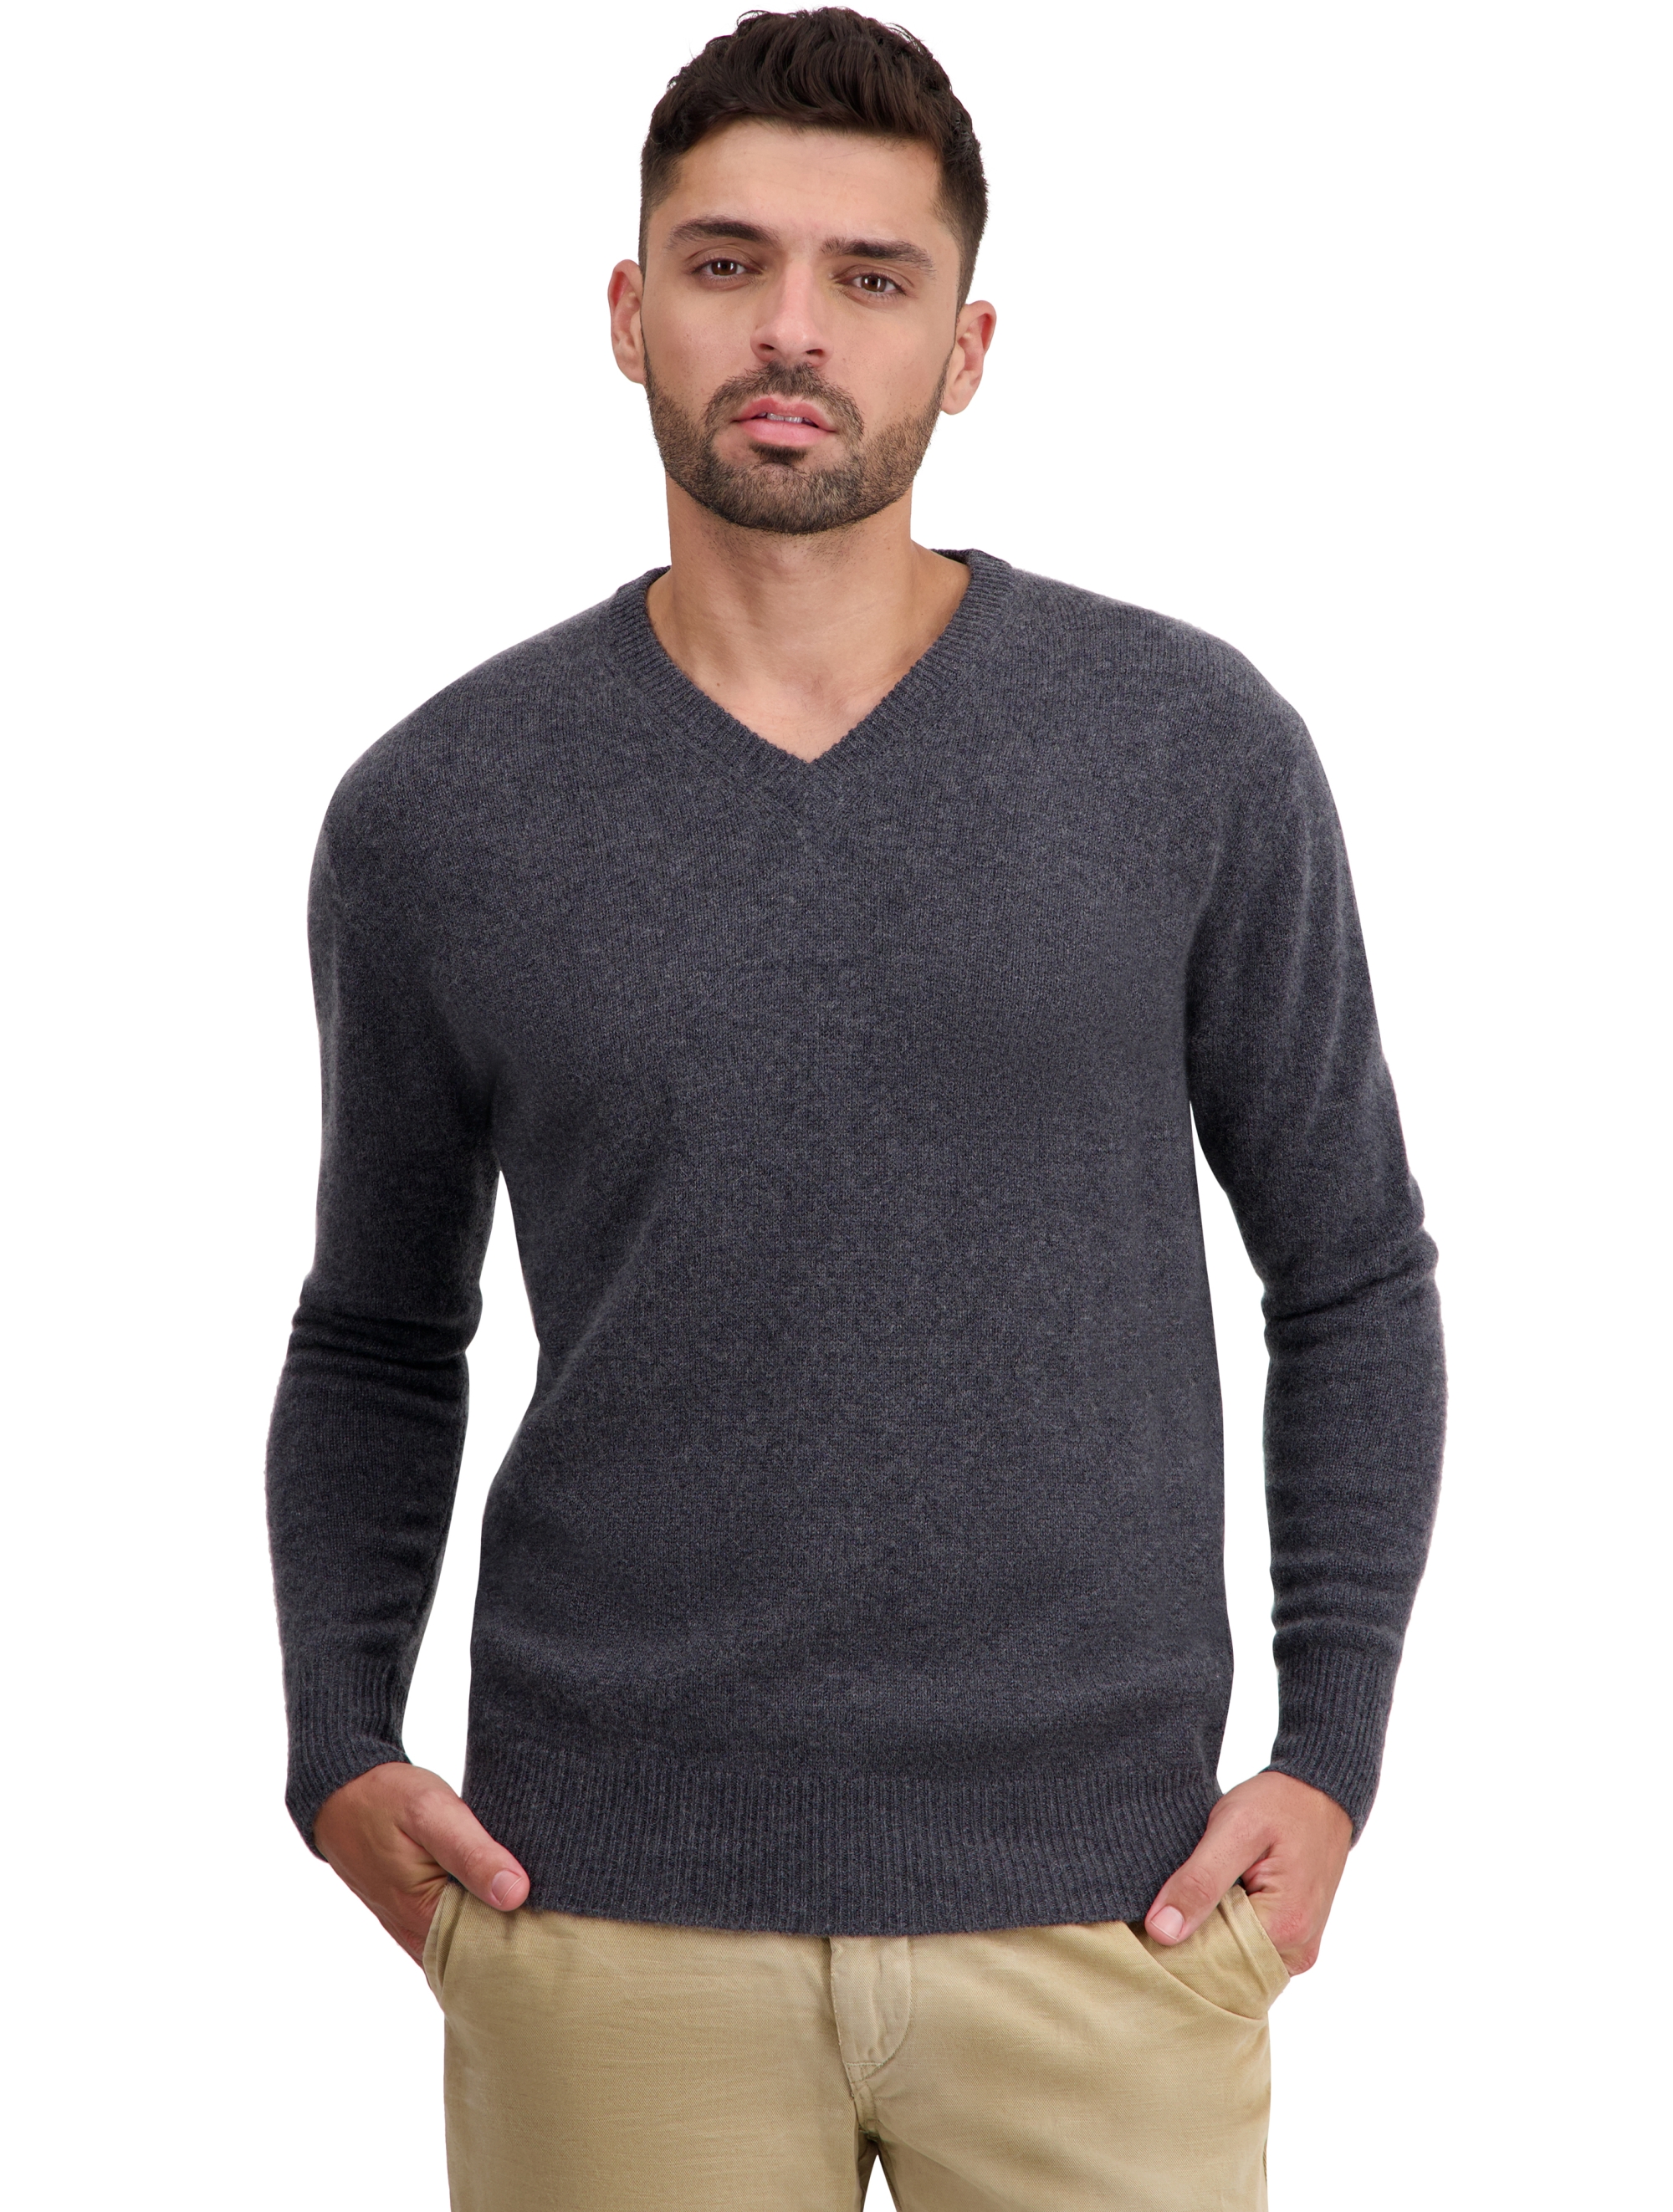 Cashmere men basic sweaters at low prices tour first charcoal marl xl